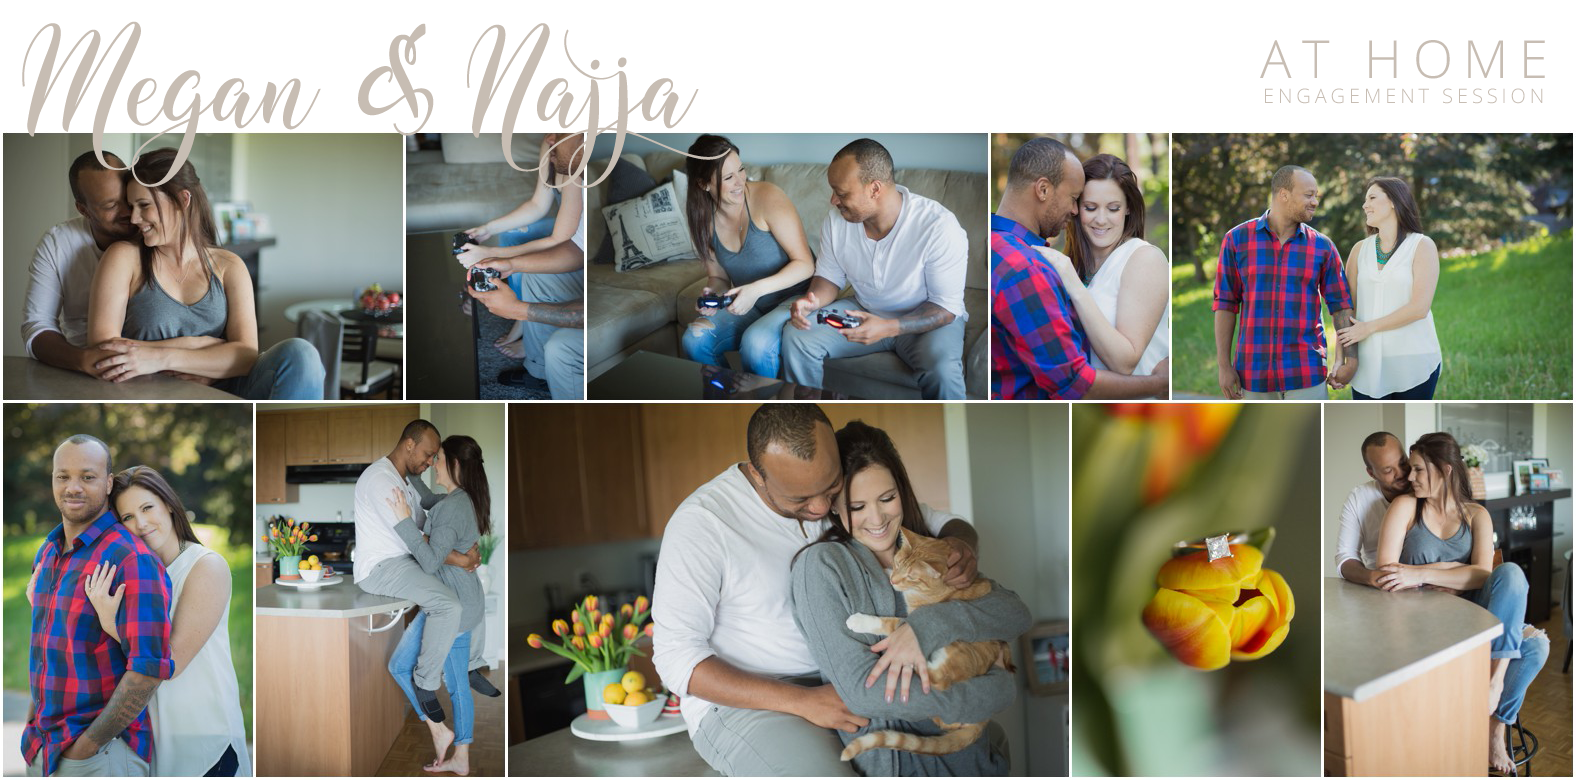 At home engagement session